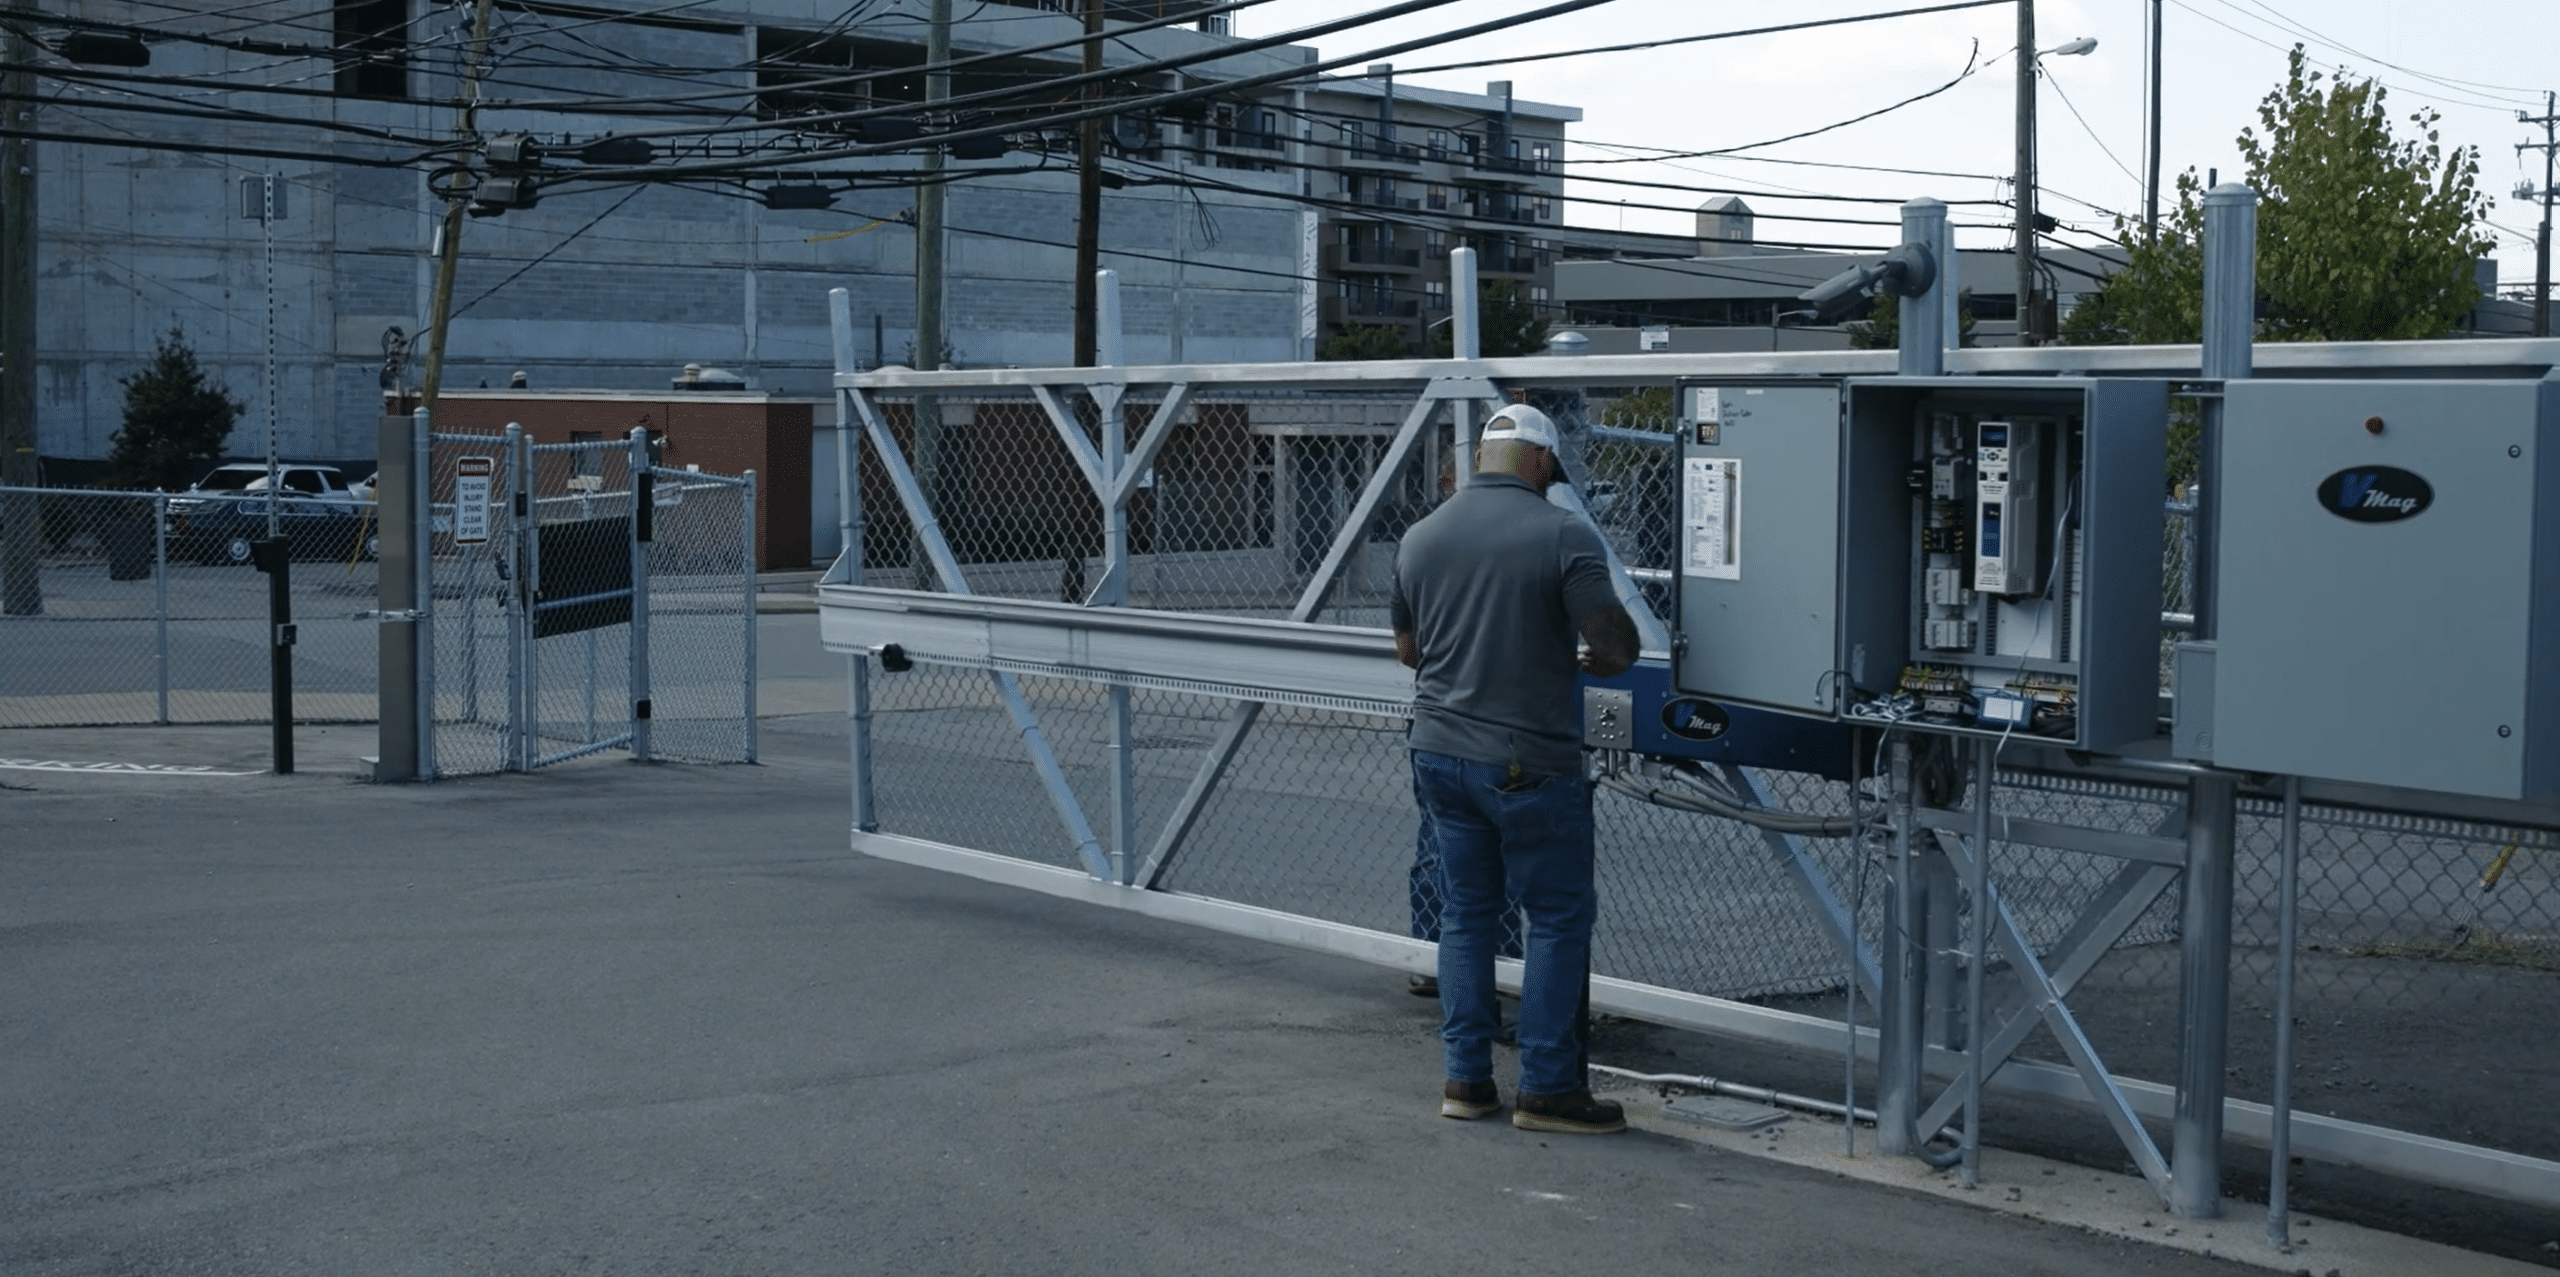 Guardian installation tech installs automatic gate at an industrial location.